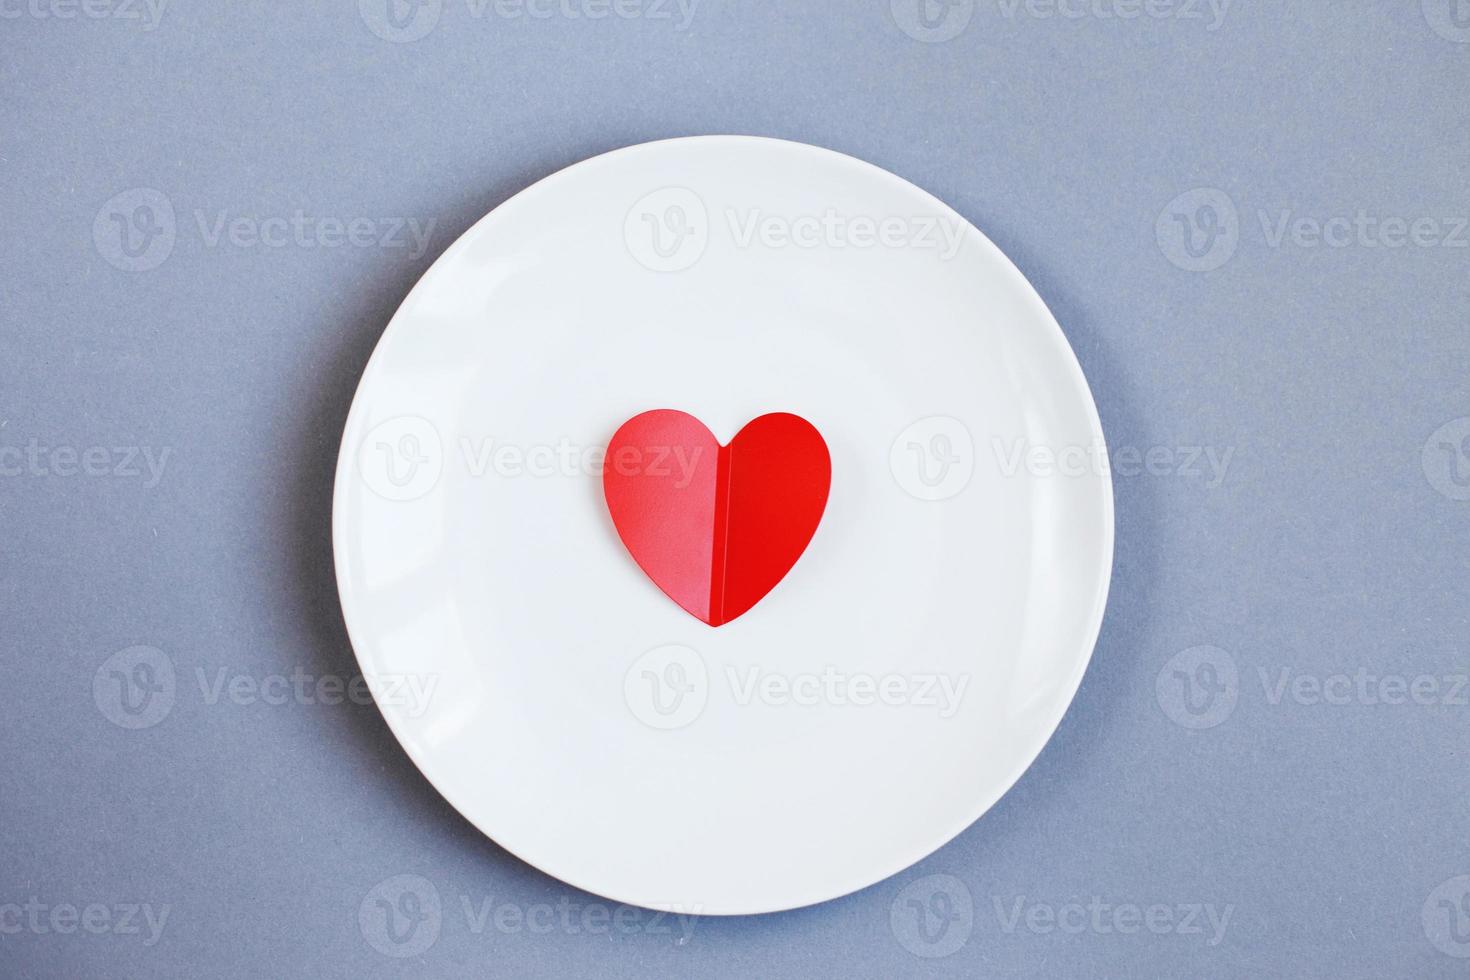 Red Heart on a white plate on grey background photo